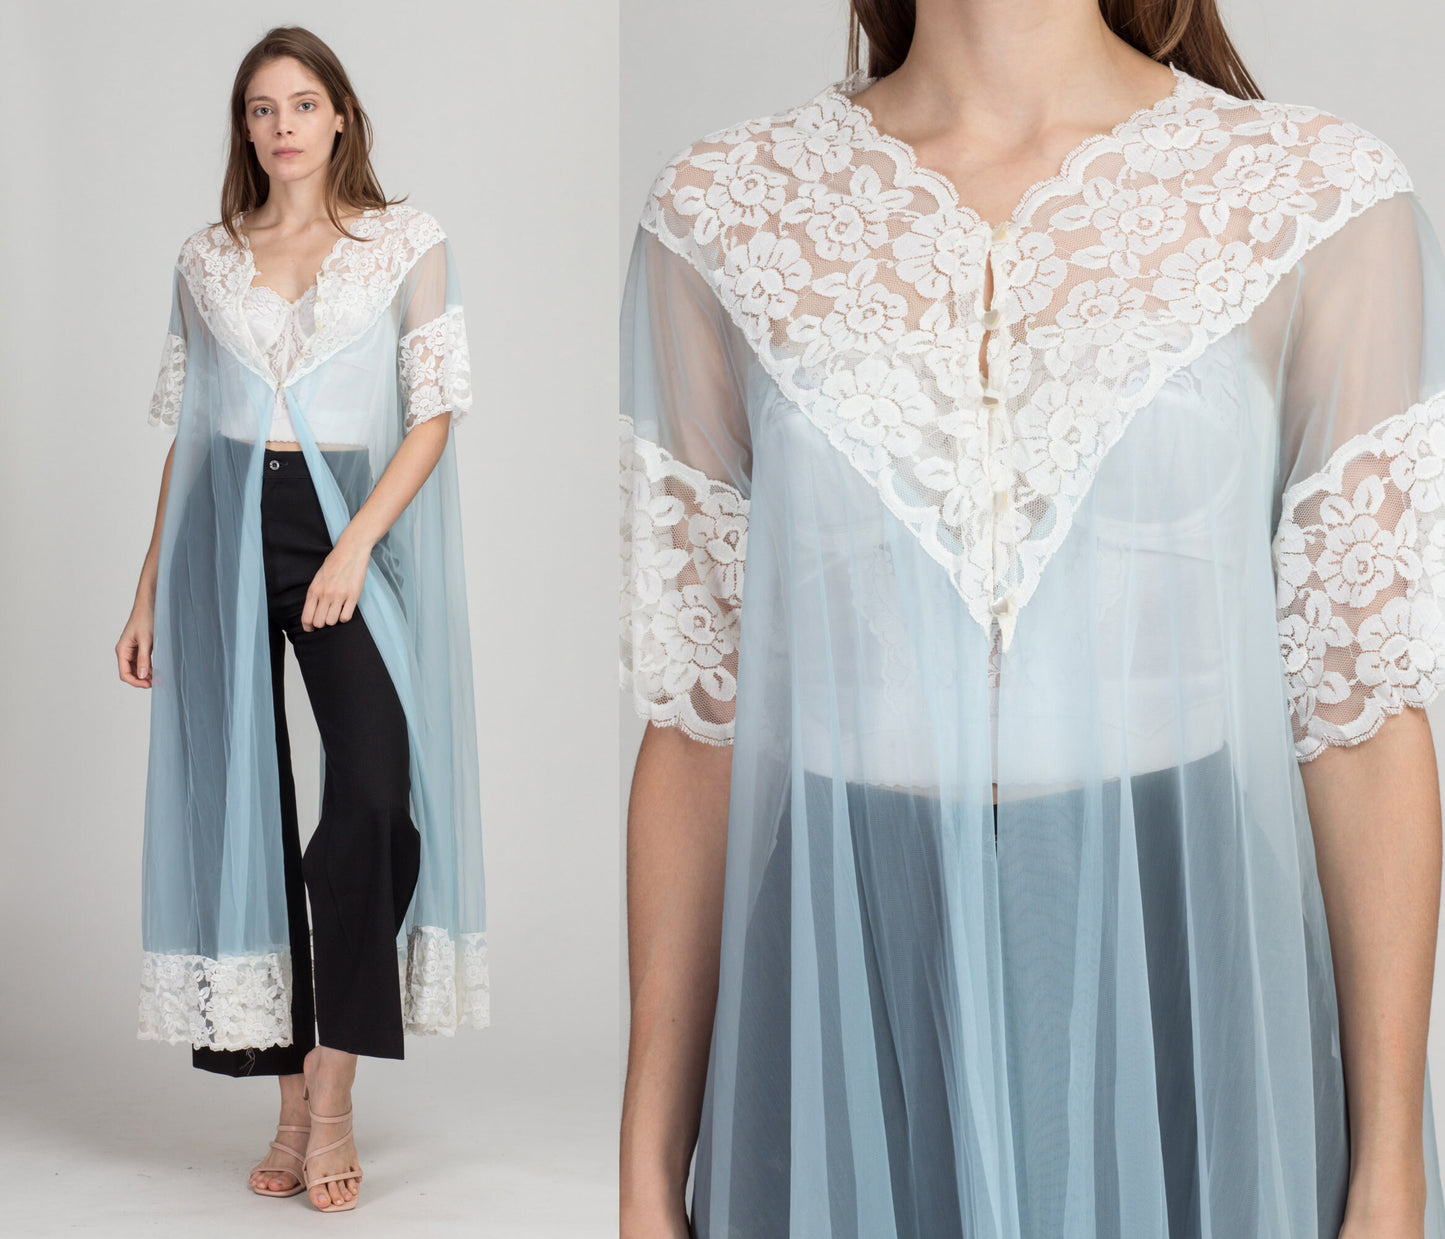 70s Le Voy Blue Lace Trim Peignoir Robe - Small to Medium | Vintage Maxi Negligee Dressing Gown